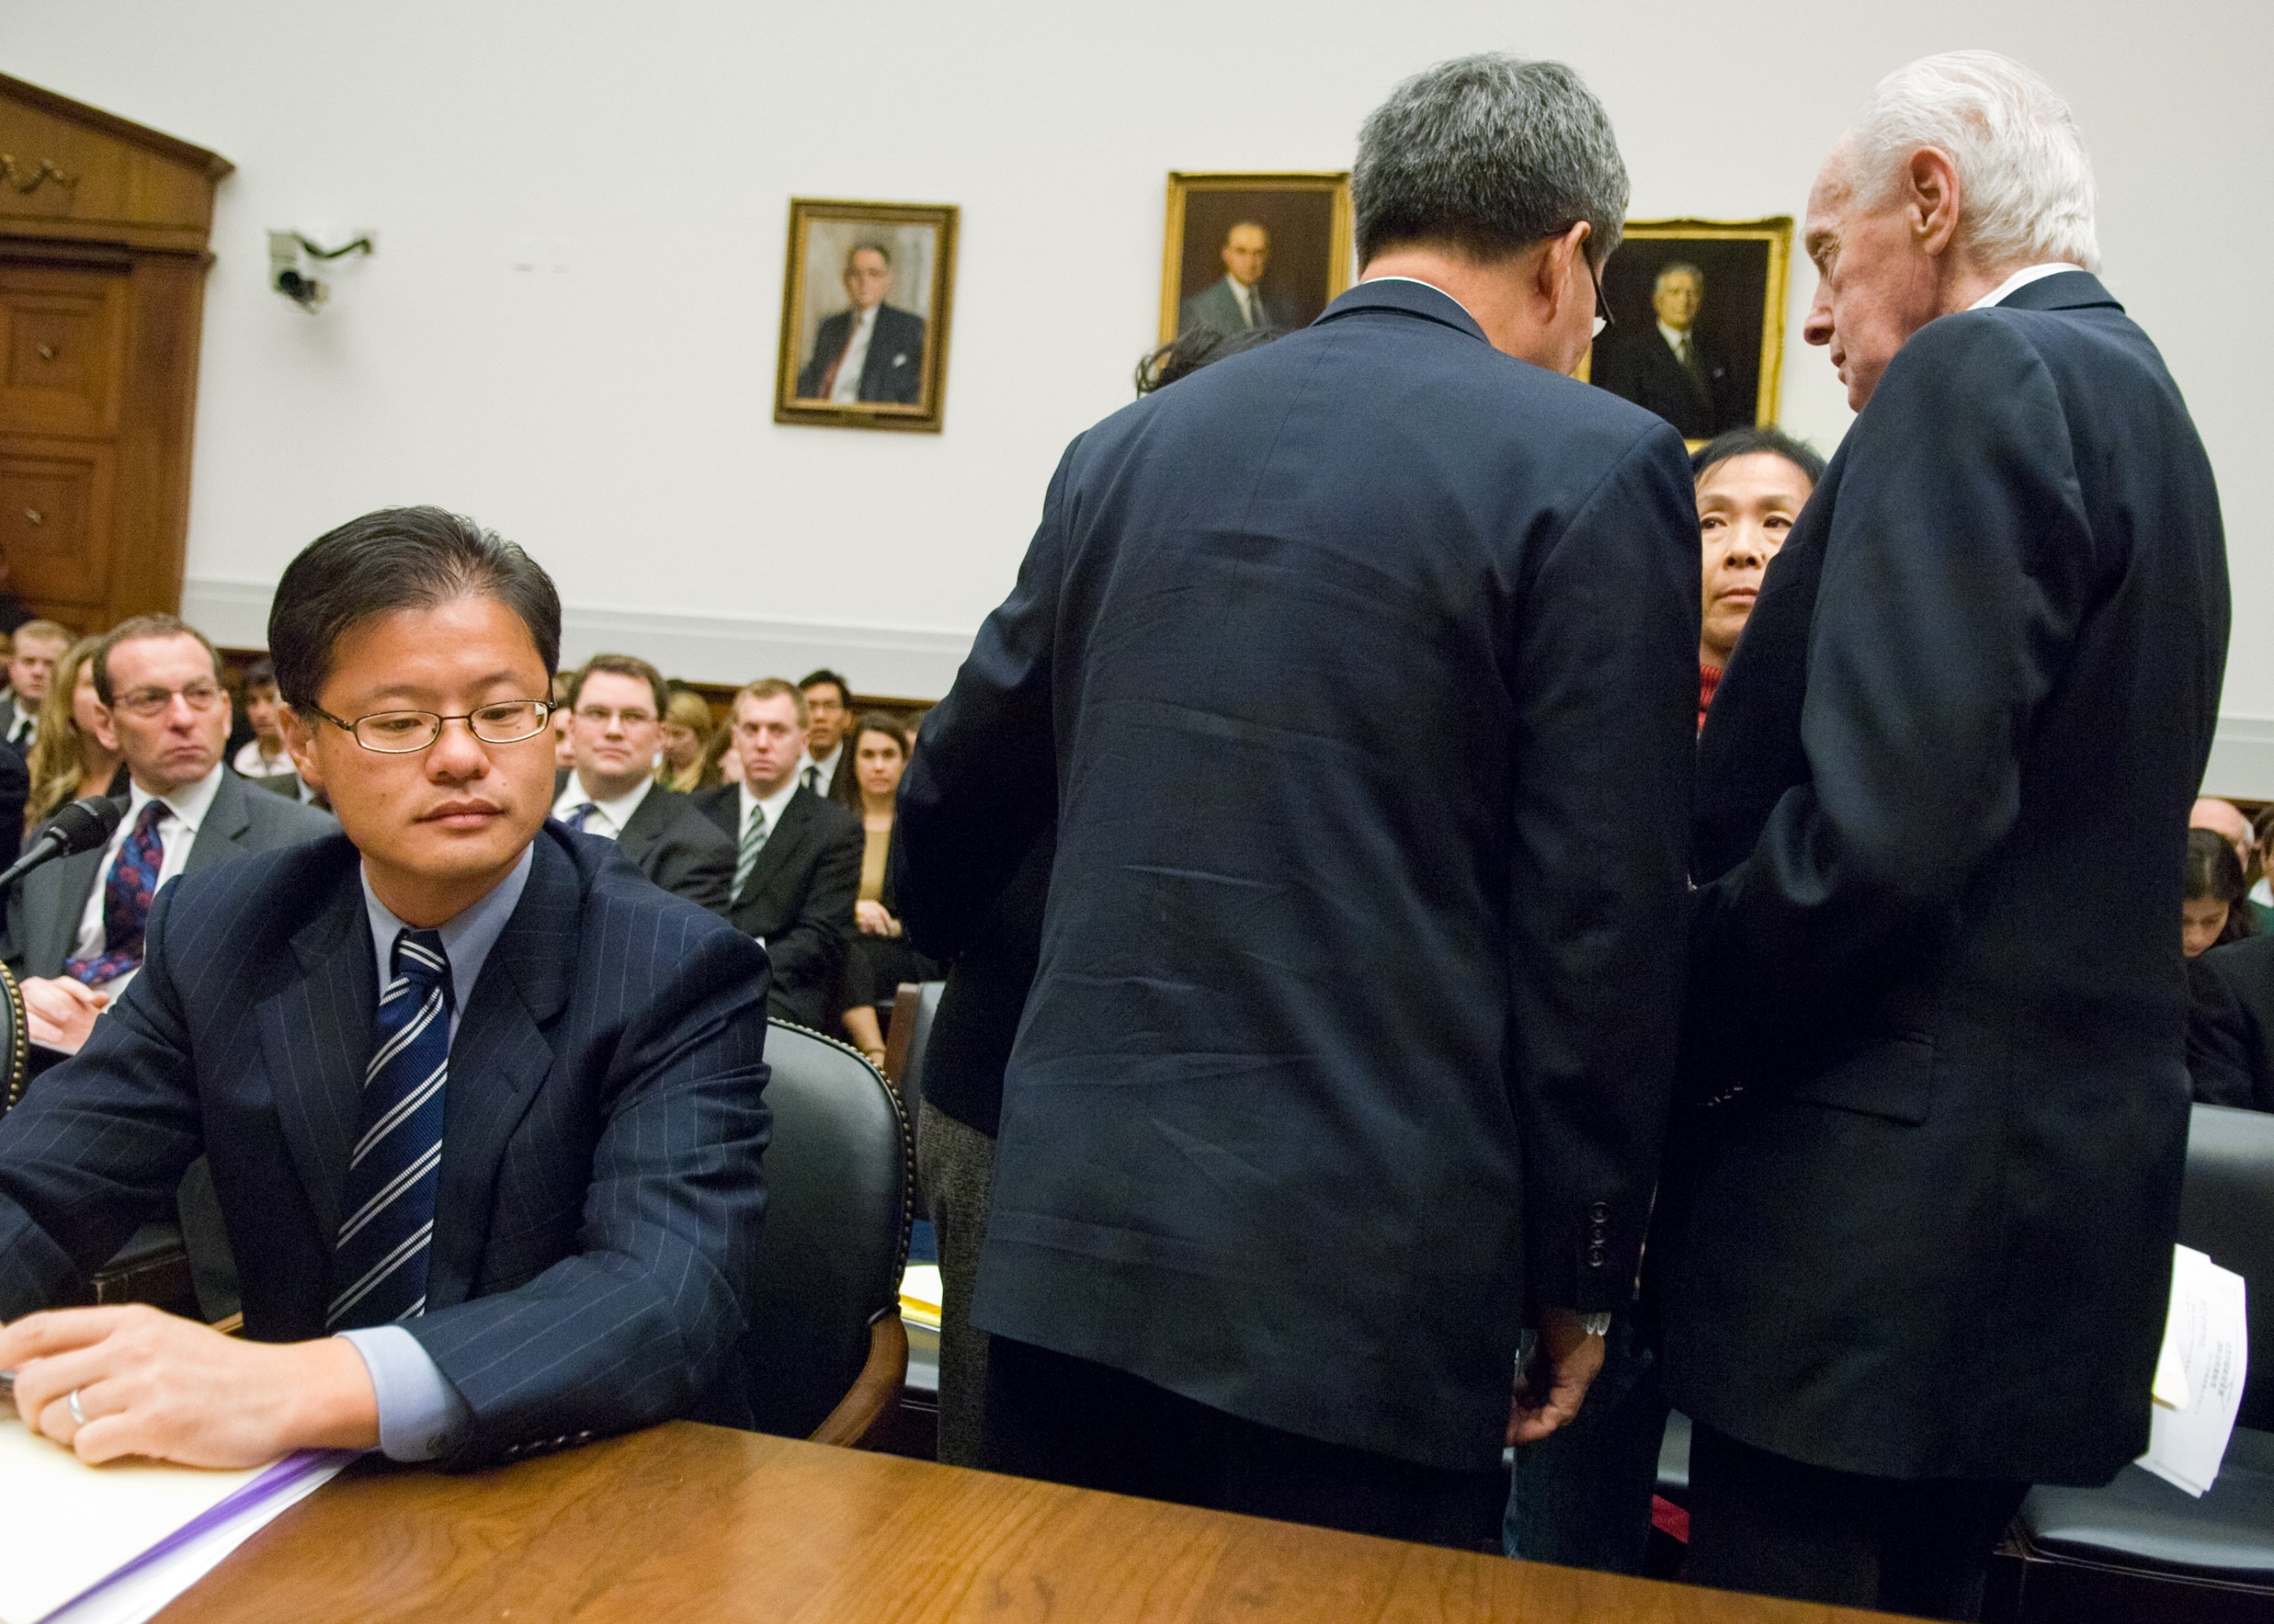 Jerry Yang seated to the left while the backs of Tom Lantos and Harry Wu are to camera as they stand with Yu Ling